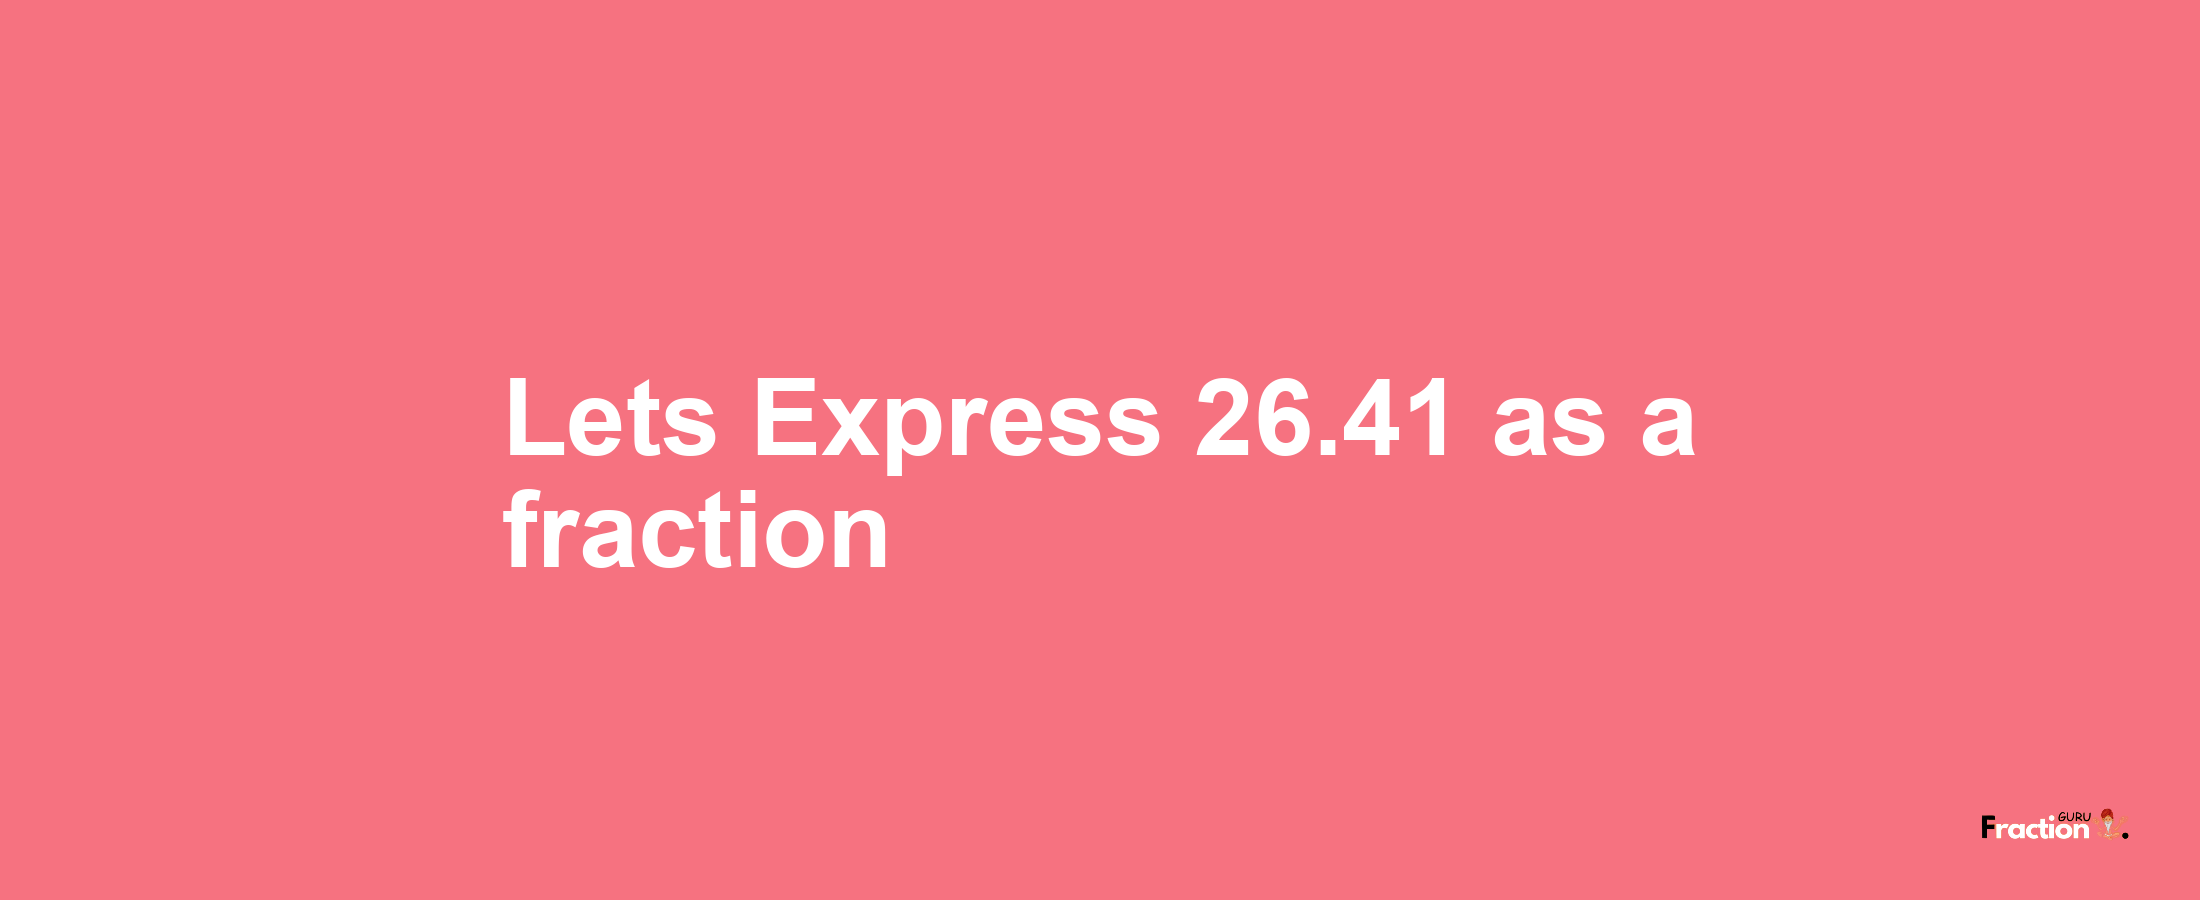 Lets Express 26.41 as afraction